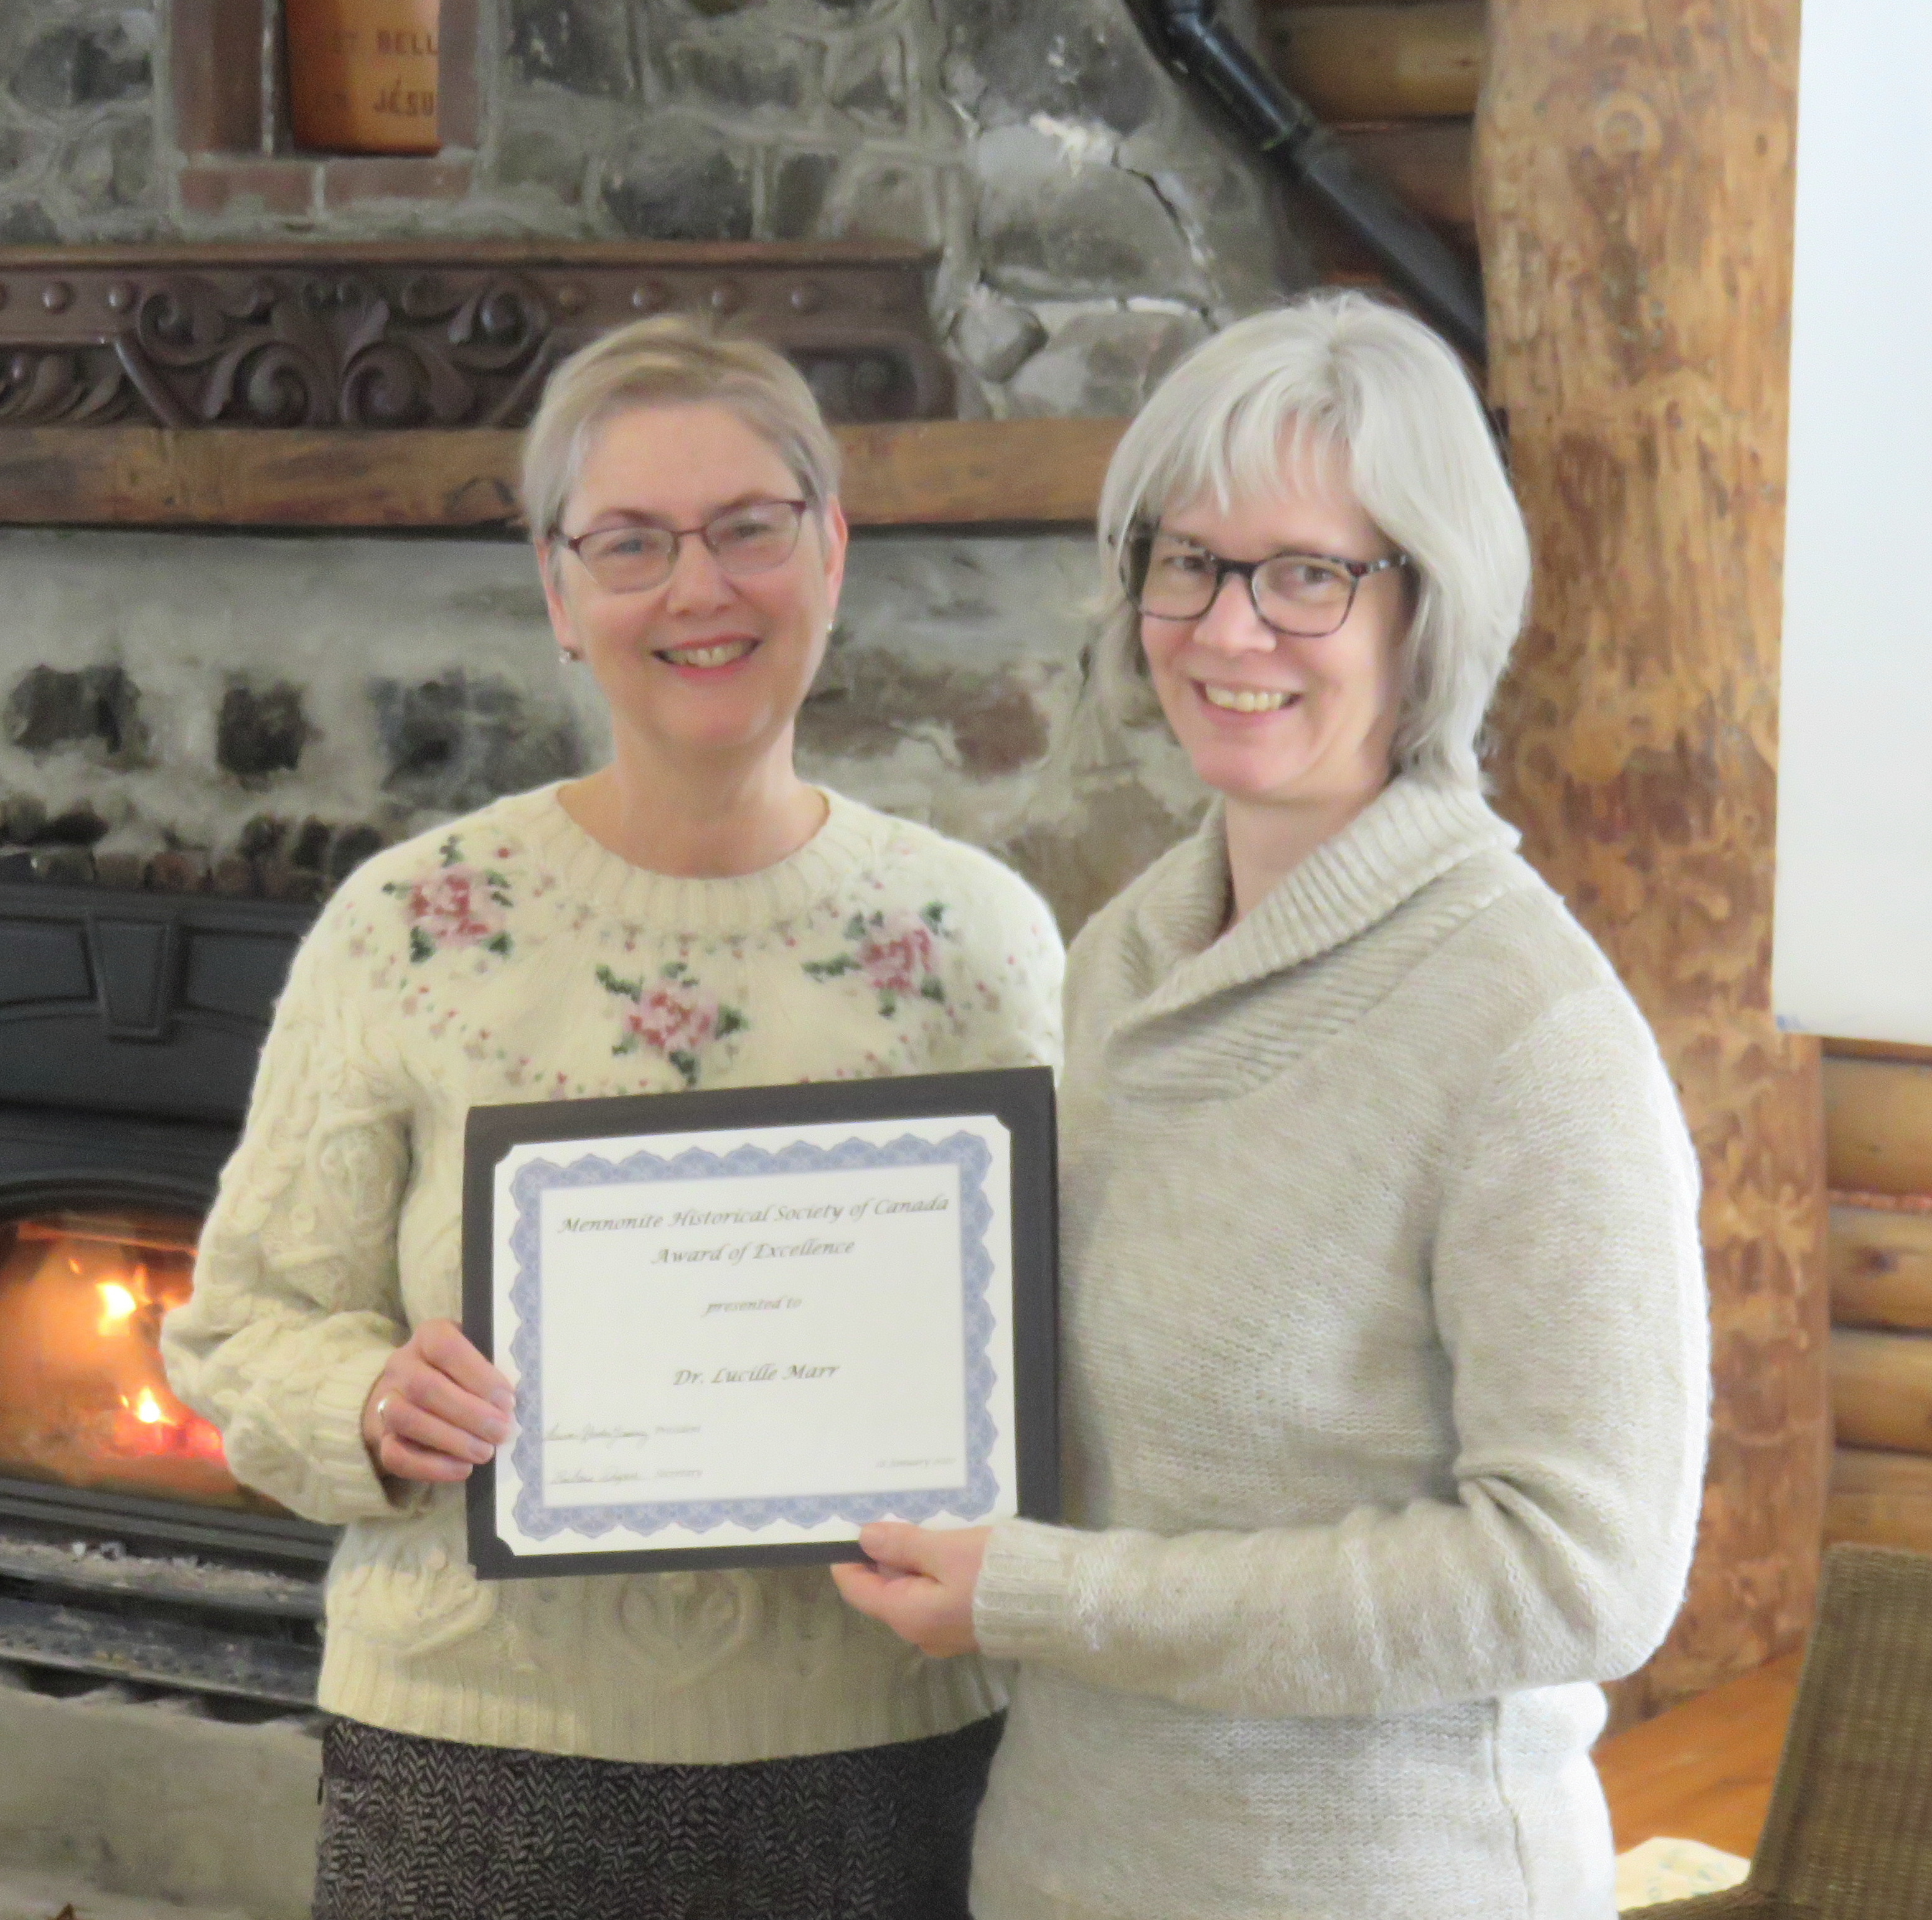 MHSC President Laureen Harder Gissing (right) presenting the 2020 Award of Excellence to Lucille Marr.